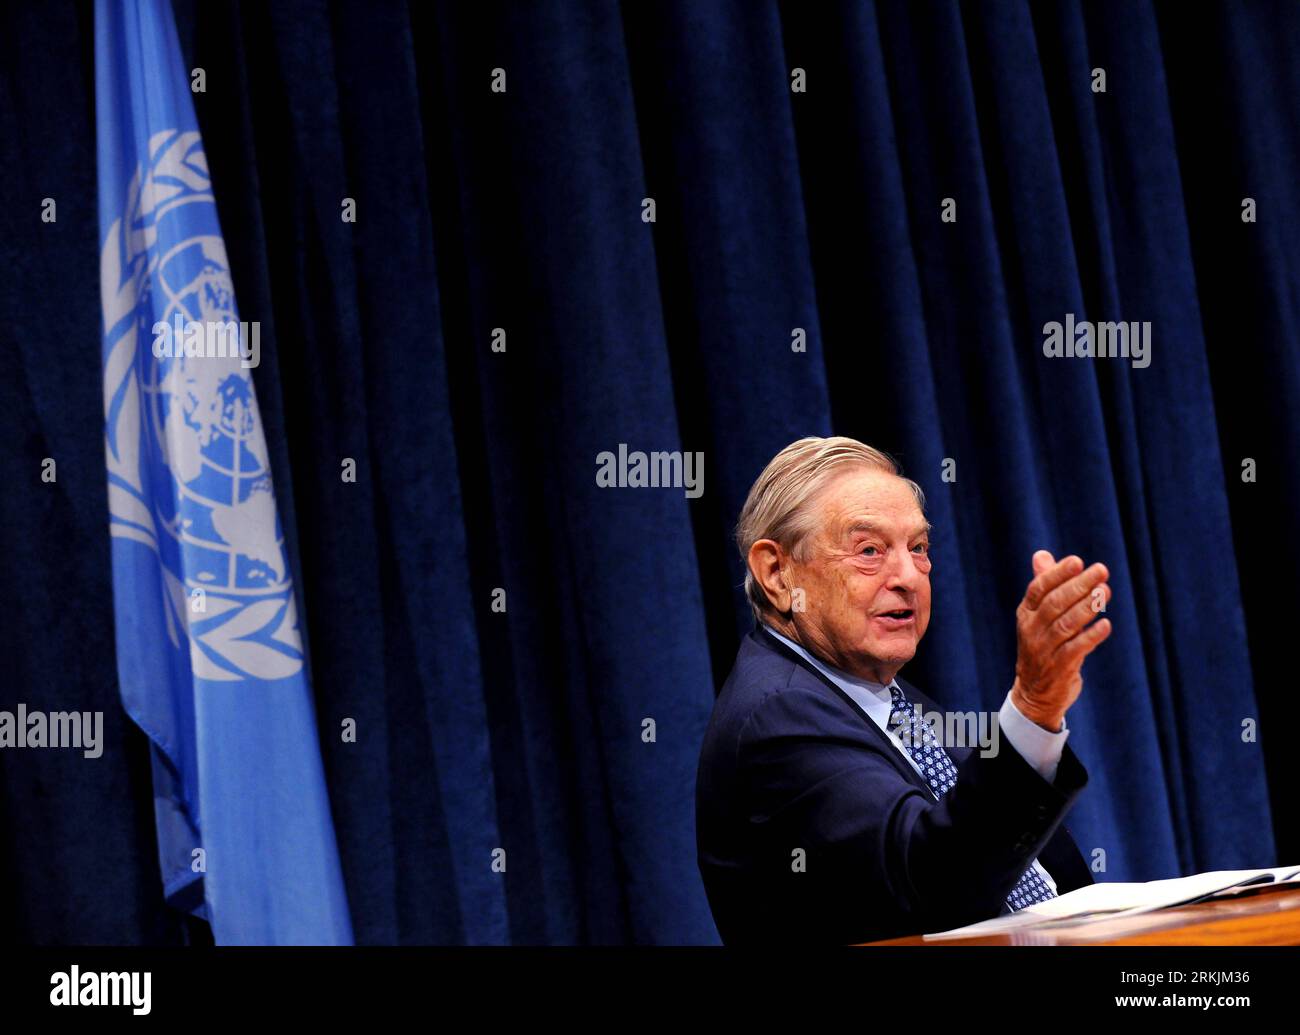 George Soros, 90. Geburtstag am 12. August 111003 -- NEW YORK, Oct. 3, 2011 Xinhua -- George Soros, founder and chairman of the Open Society Foundations, attends a news conference at the UN headquarters in New York, the United States, Oct. 3, 2011. The Millennium Villages Project, a science-based partnership in rural Arrica working to achieve the Millennium Development Goals, launched its second phase here Monday. The program will move into its next and final phase with more than 72 million U.S. dollars in new pledges, including 47.4 million U.S. dollars announced today by Soros. Xinhua/Shen H Stock Photo